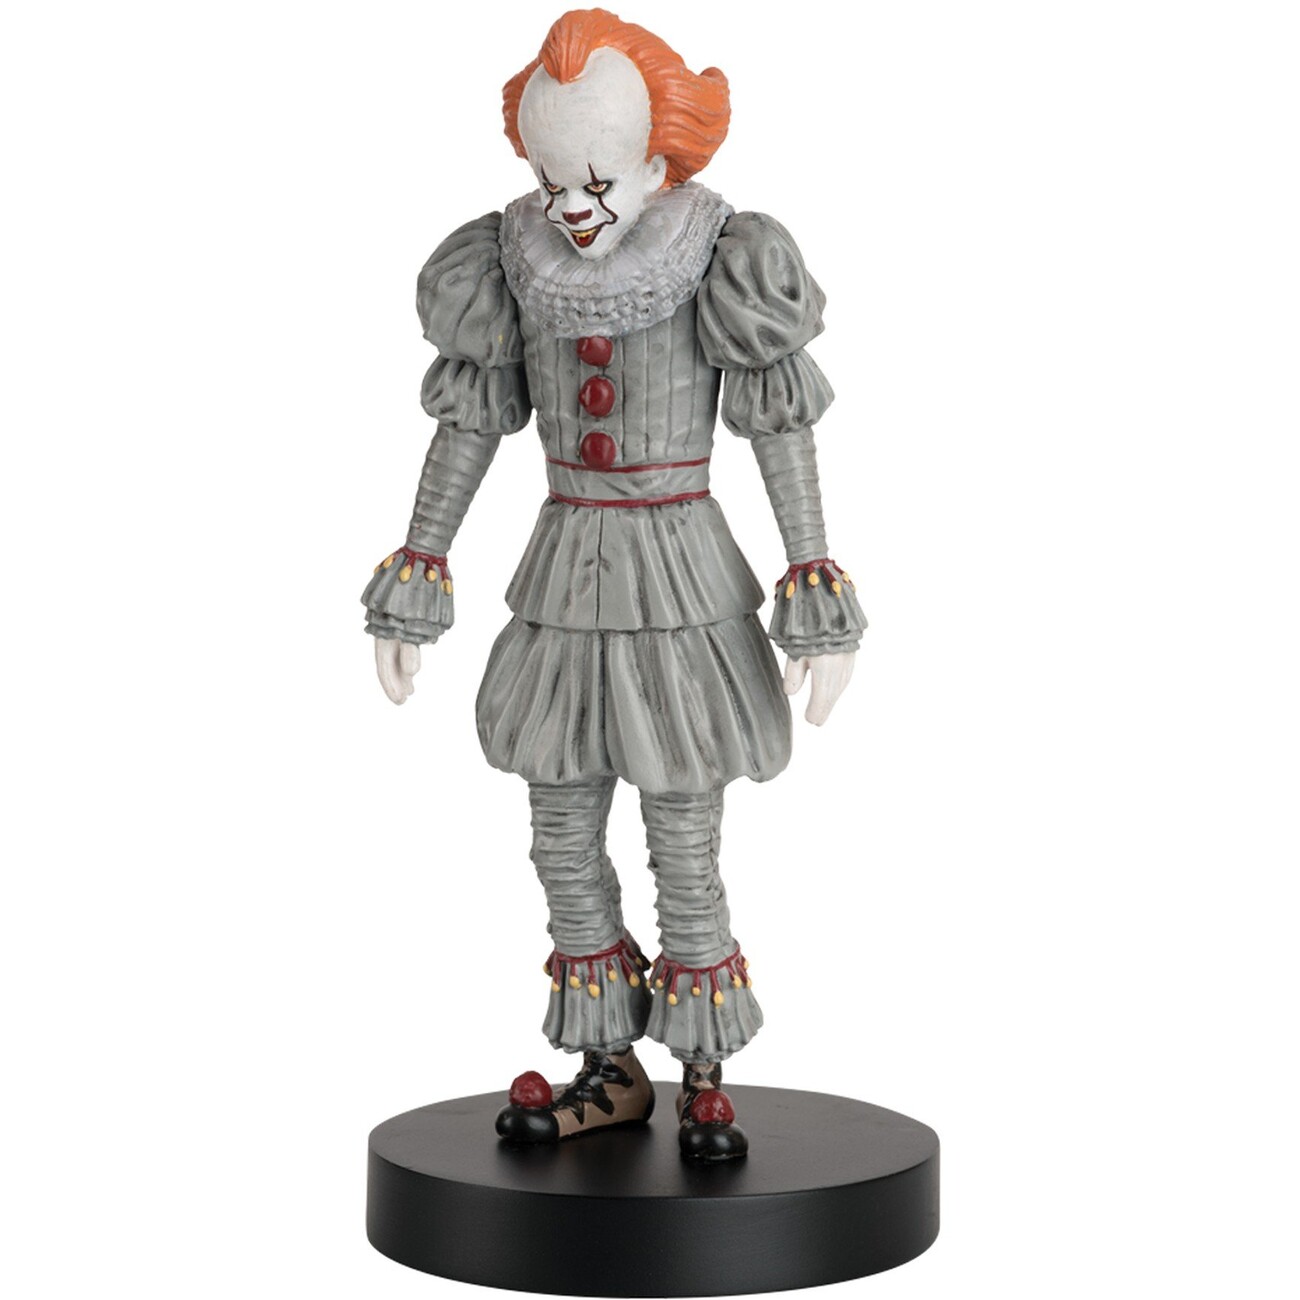 Figurine It - Pennywise 2019 | Tips for original gifts